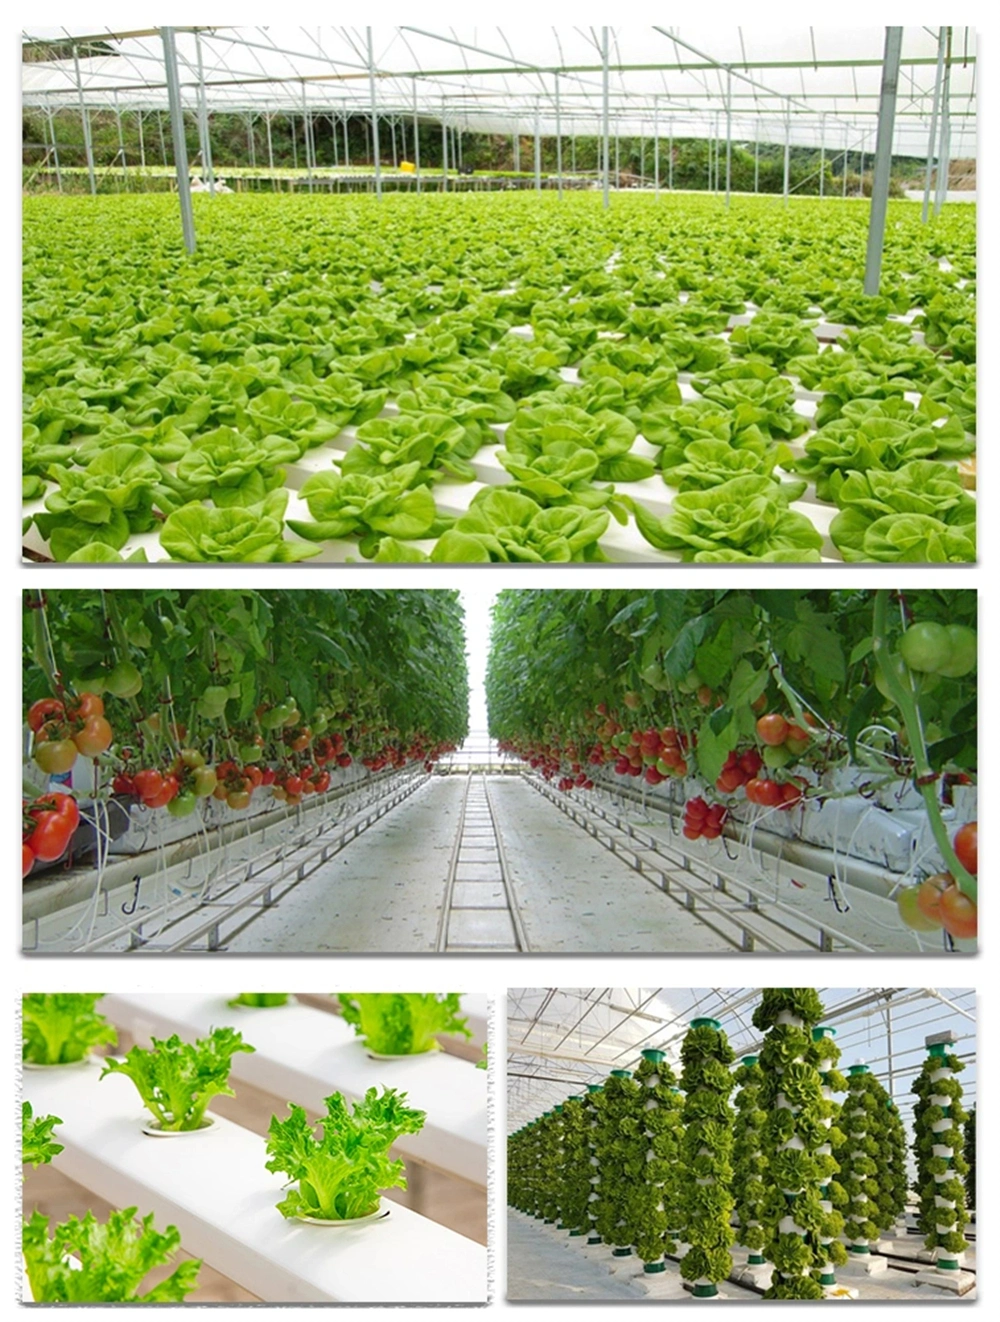 Agricultural Plastic Multi-Span Arch Tunnel Film Hydroponic Greenhouse for Farming/Planting/Cucumber/Flower/Tomato